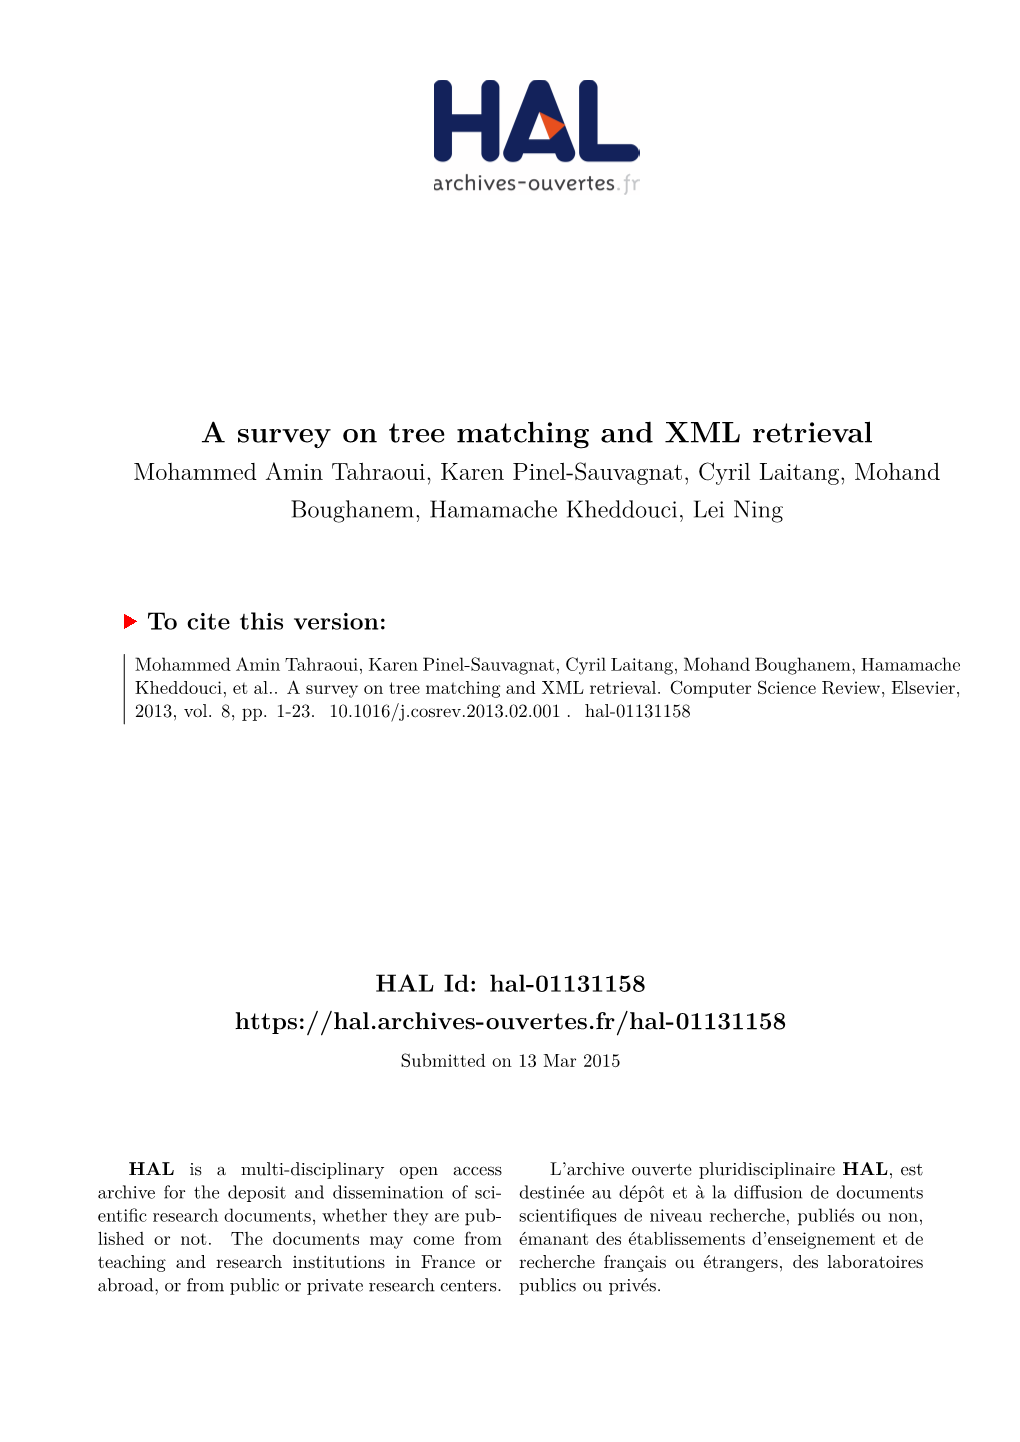 A Survey on Tree Matching and XML Retrieval Mohammed Amin Tahraoui, Karen Pinel-Sauvagnat, Cyril Laitang, Mohand Boughanem, Hamamache Kheddouci, Lei Ning